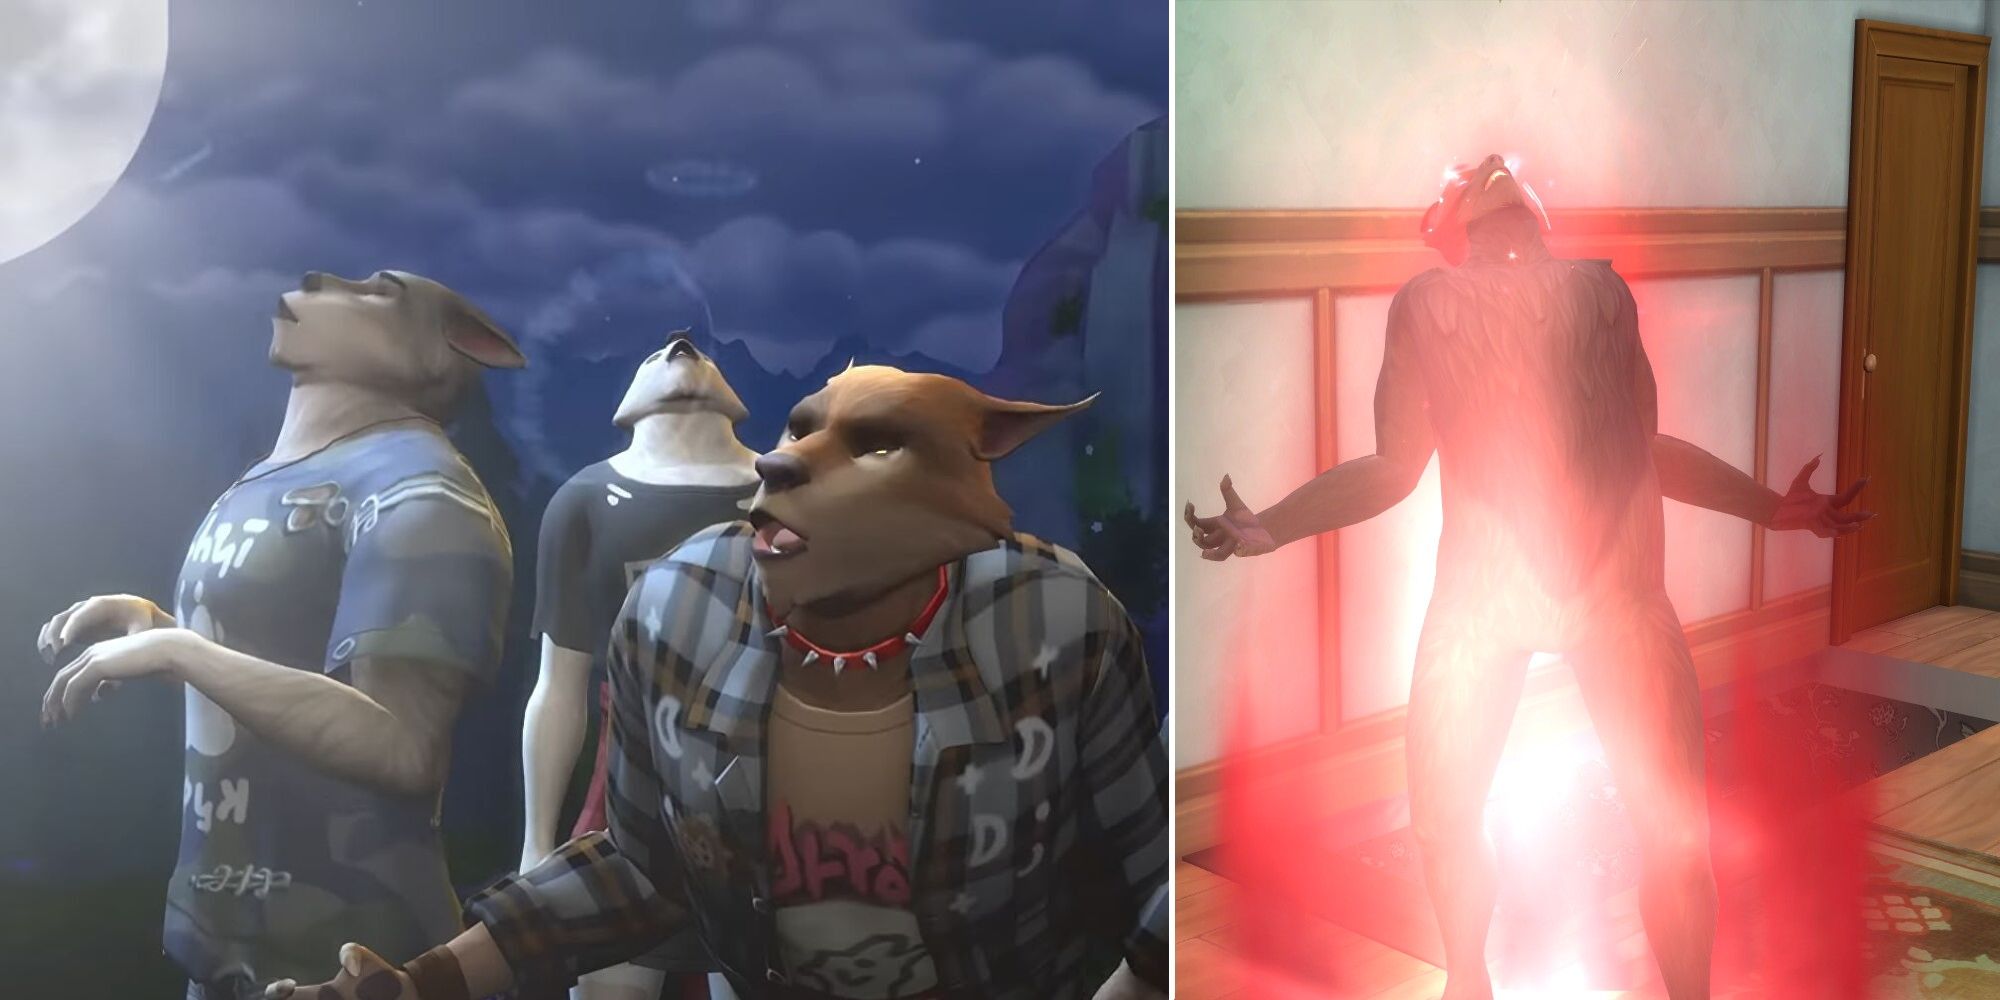 All cheats for The Sims 4 Werewolves & how to use them